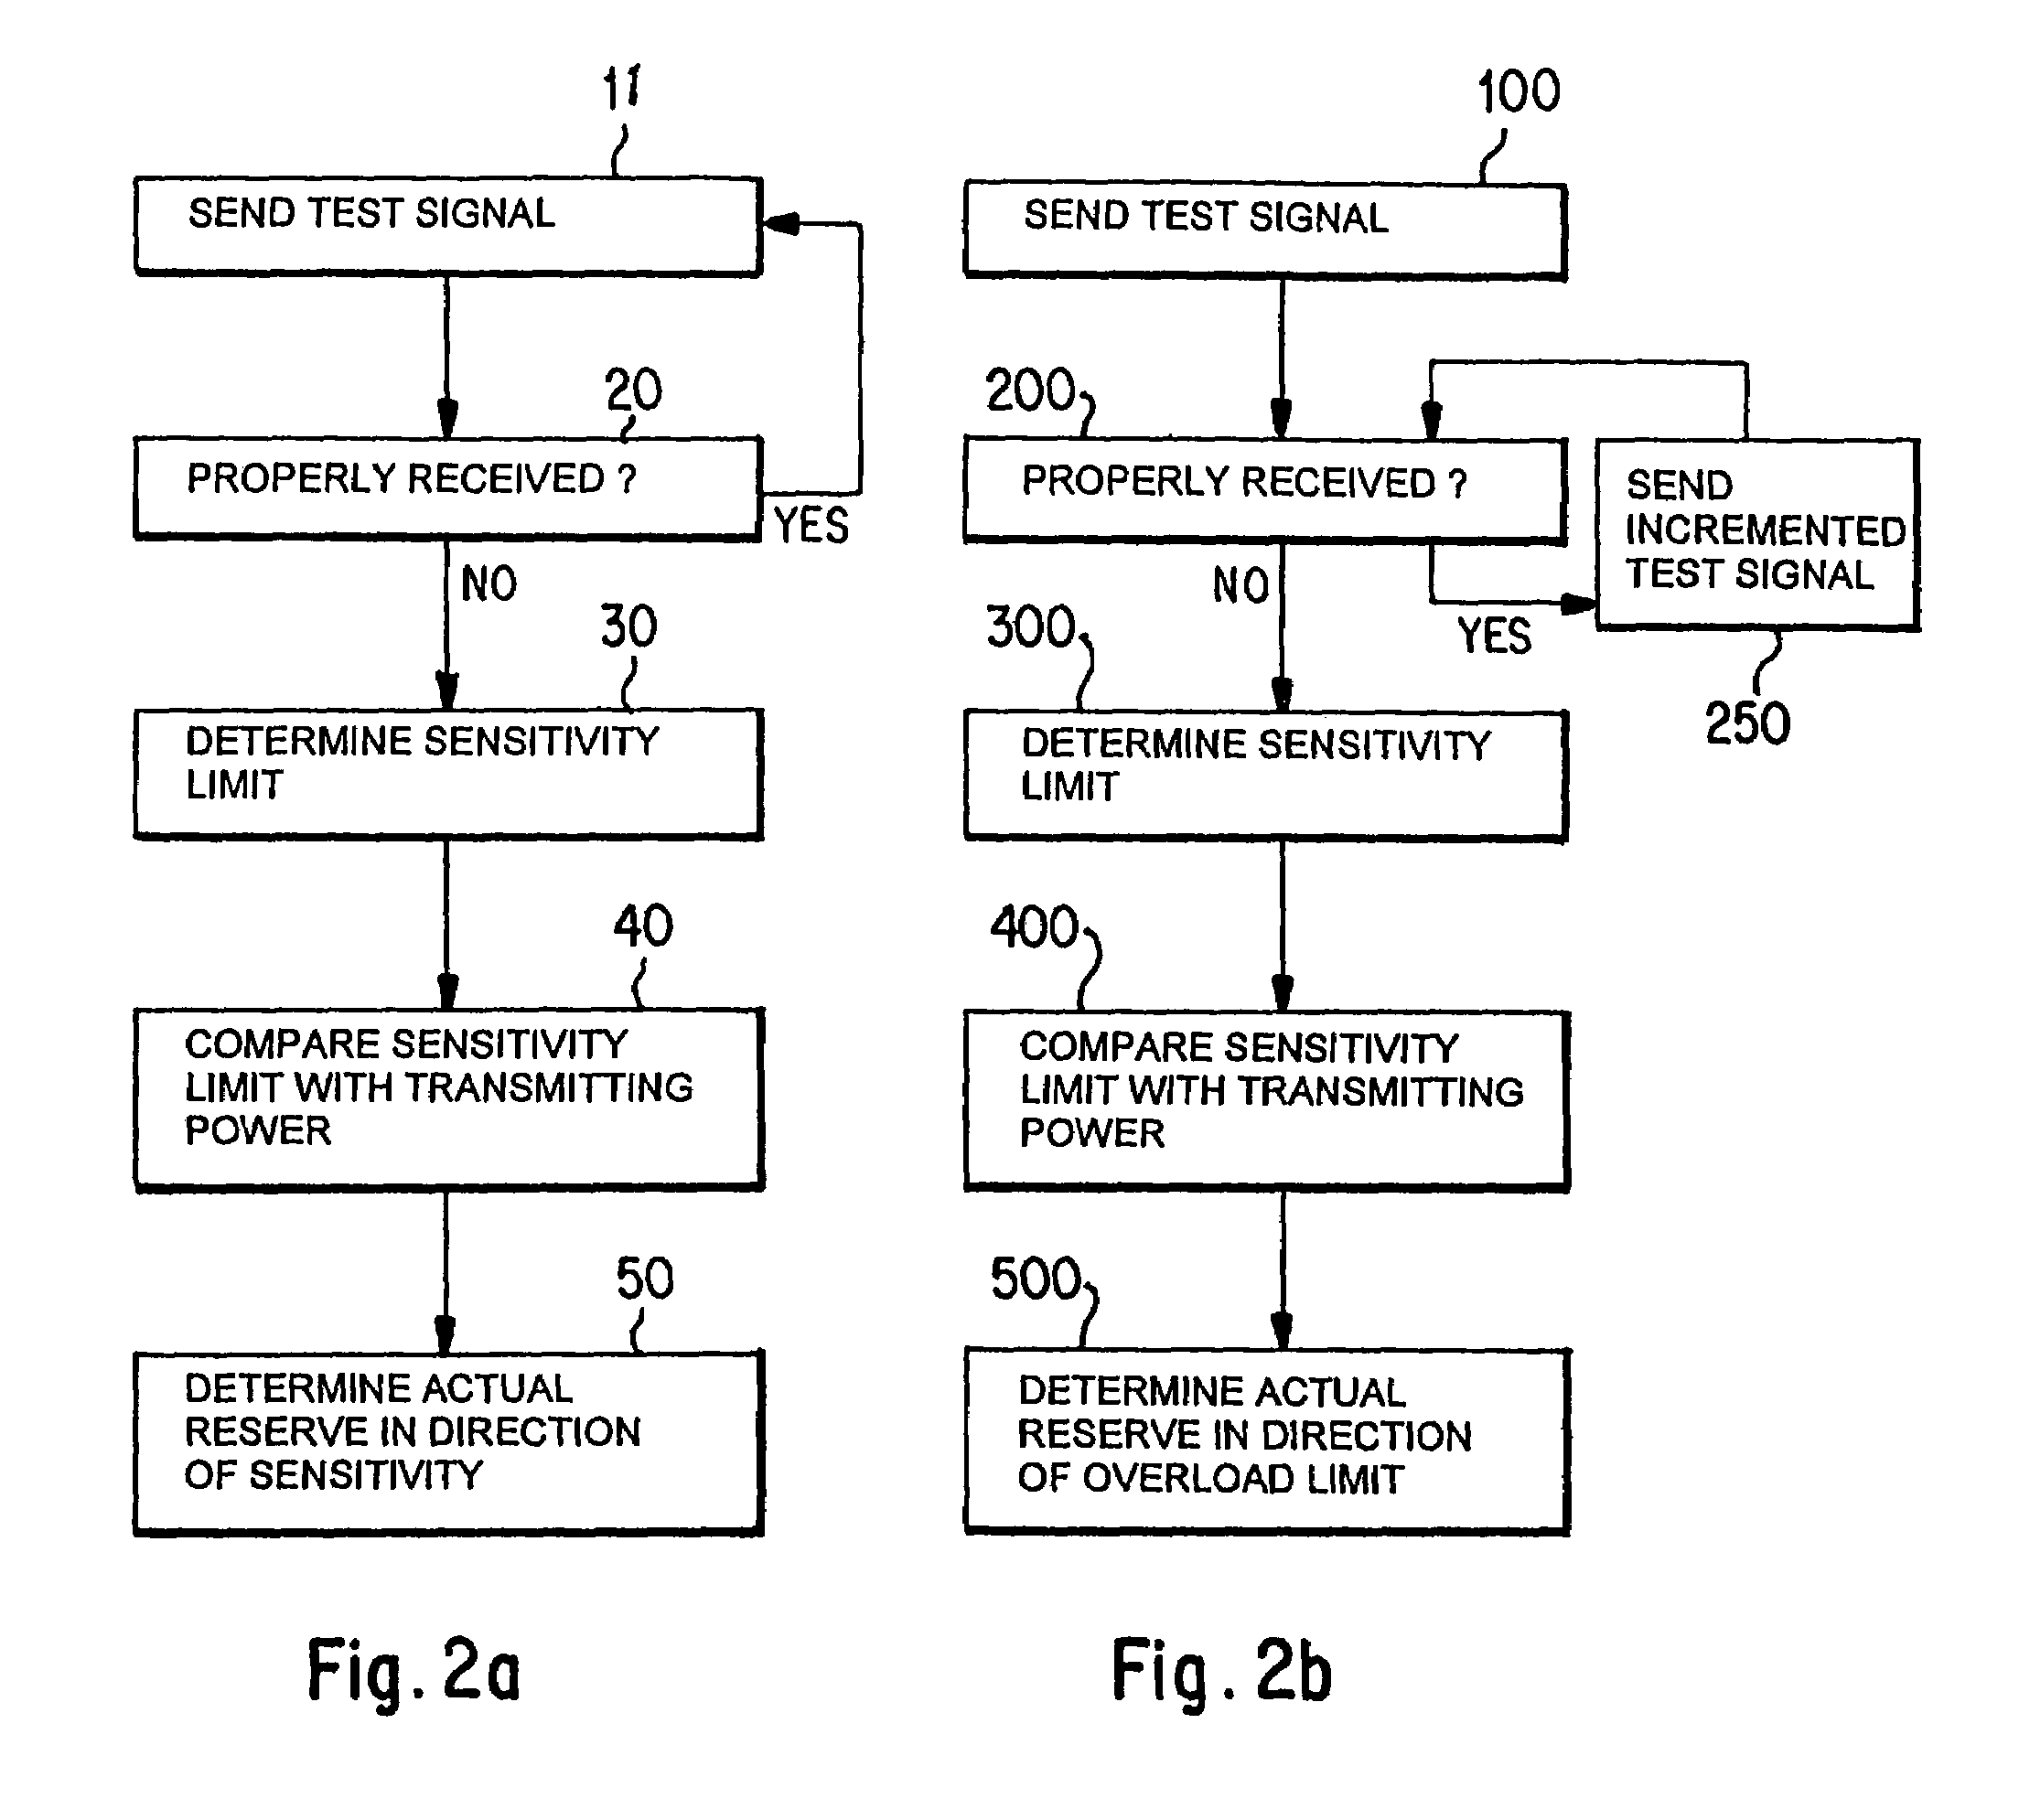 Method for operating a data network